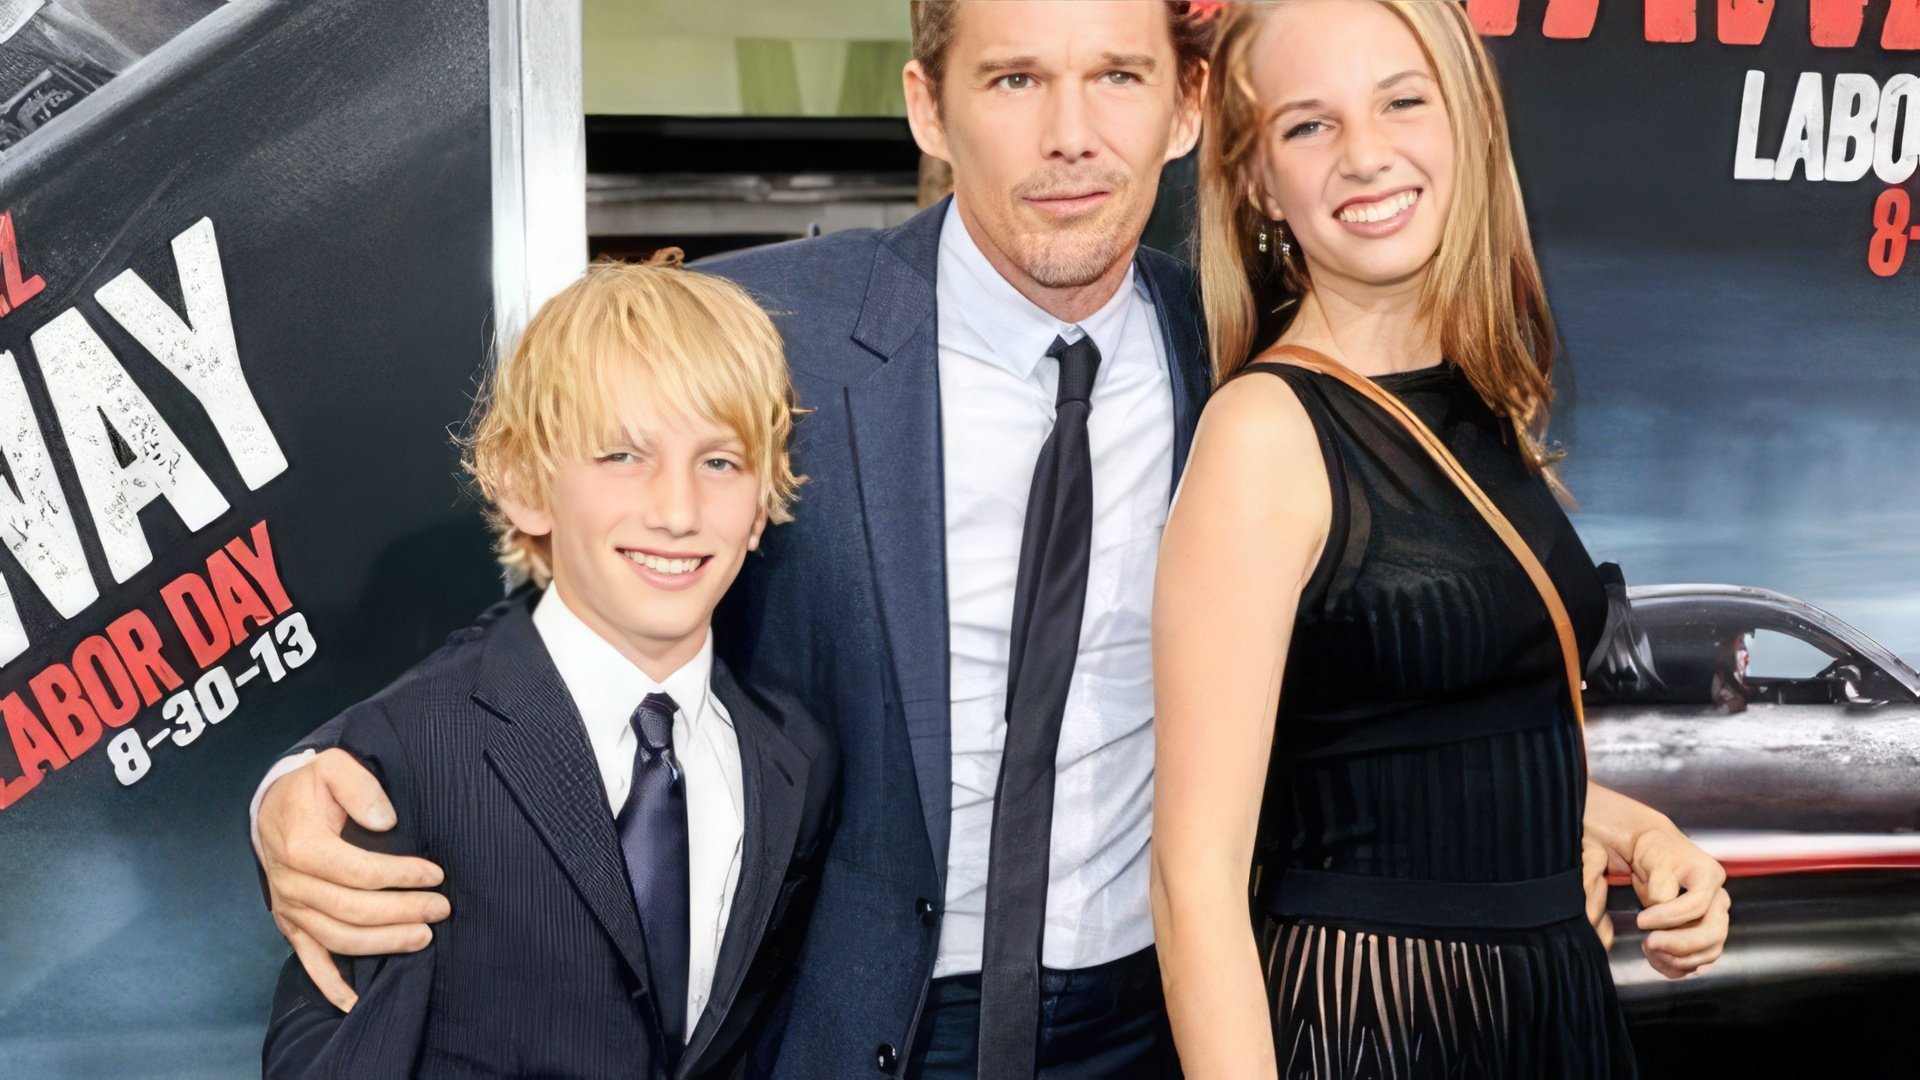 Ethan Hawke and his children from his marriage to Uma Thurman